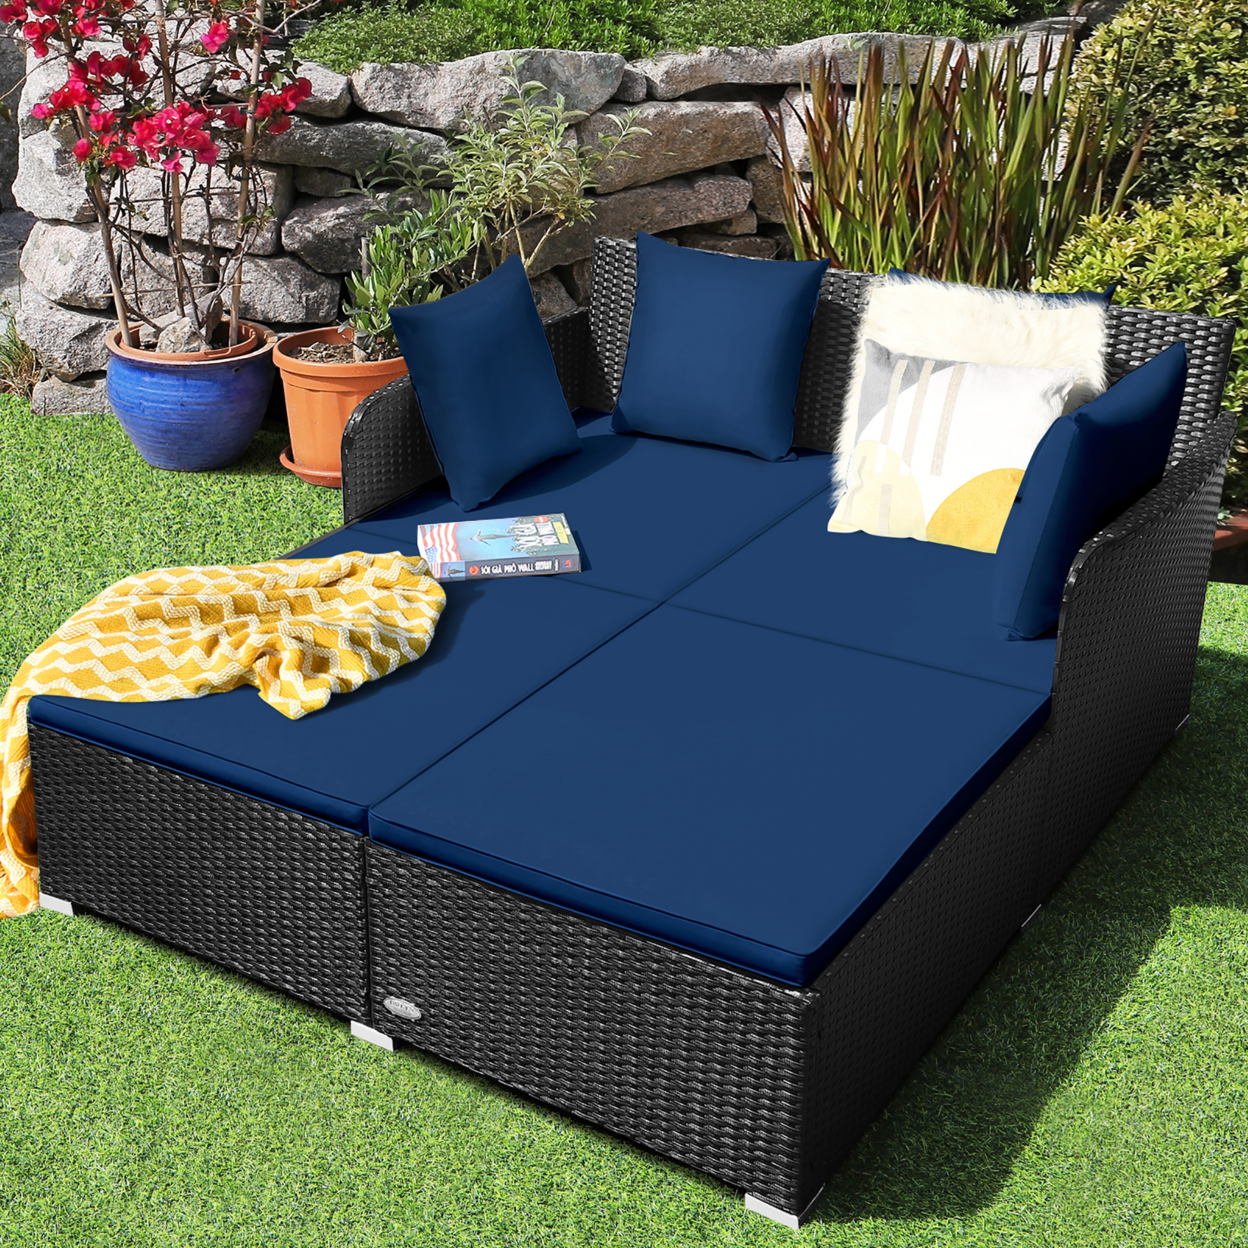 Rattan Patio Daybed Loveseat Sofa Yard Outdoor W/ Navy Cushions Pillows